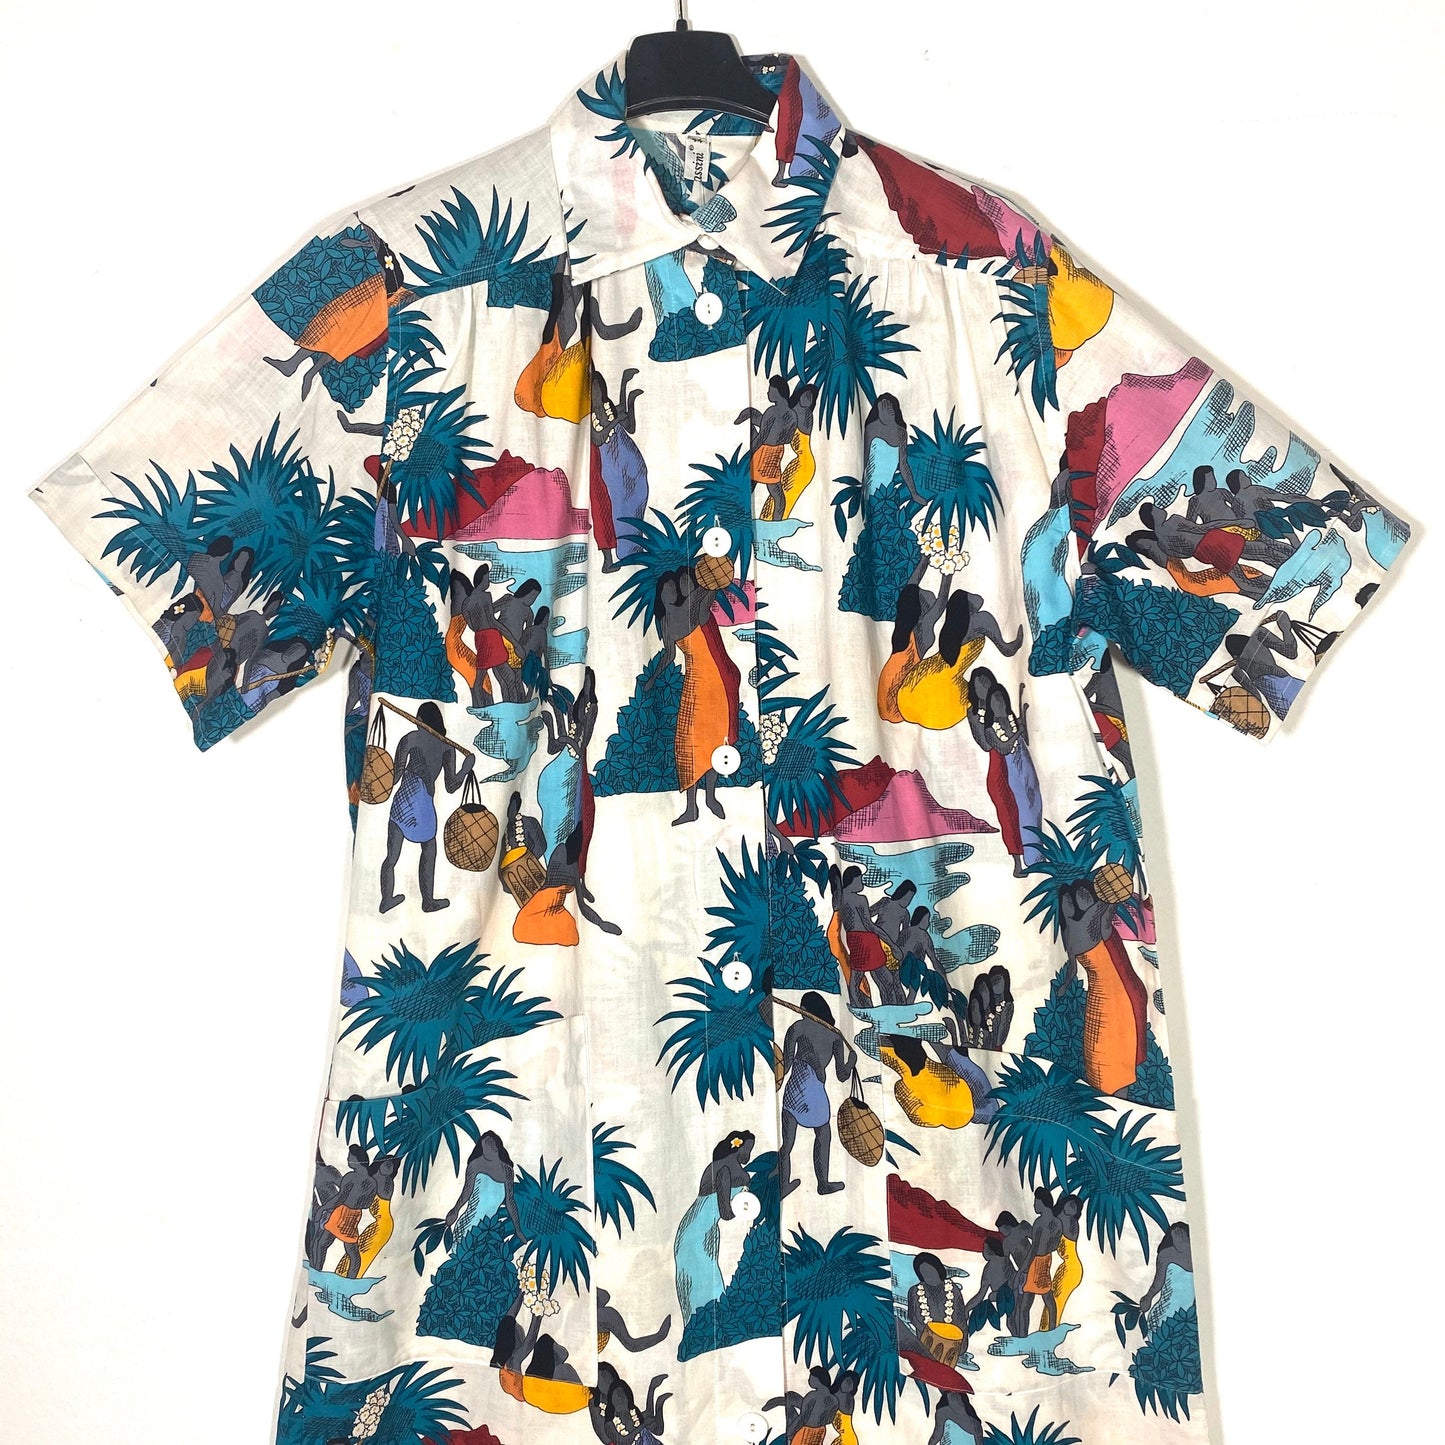 Oleg Cassini colorful tropical tribes print shirt dress, finest quality light and fresh cotton ideal for spring/summer, size 44